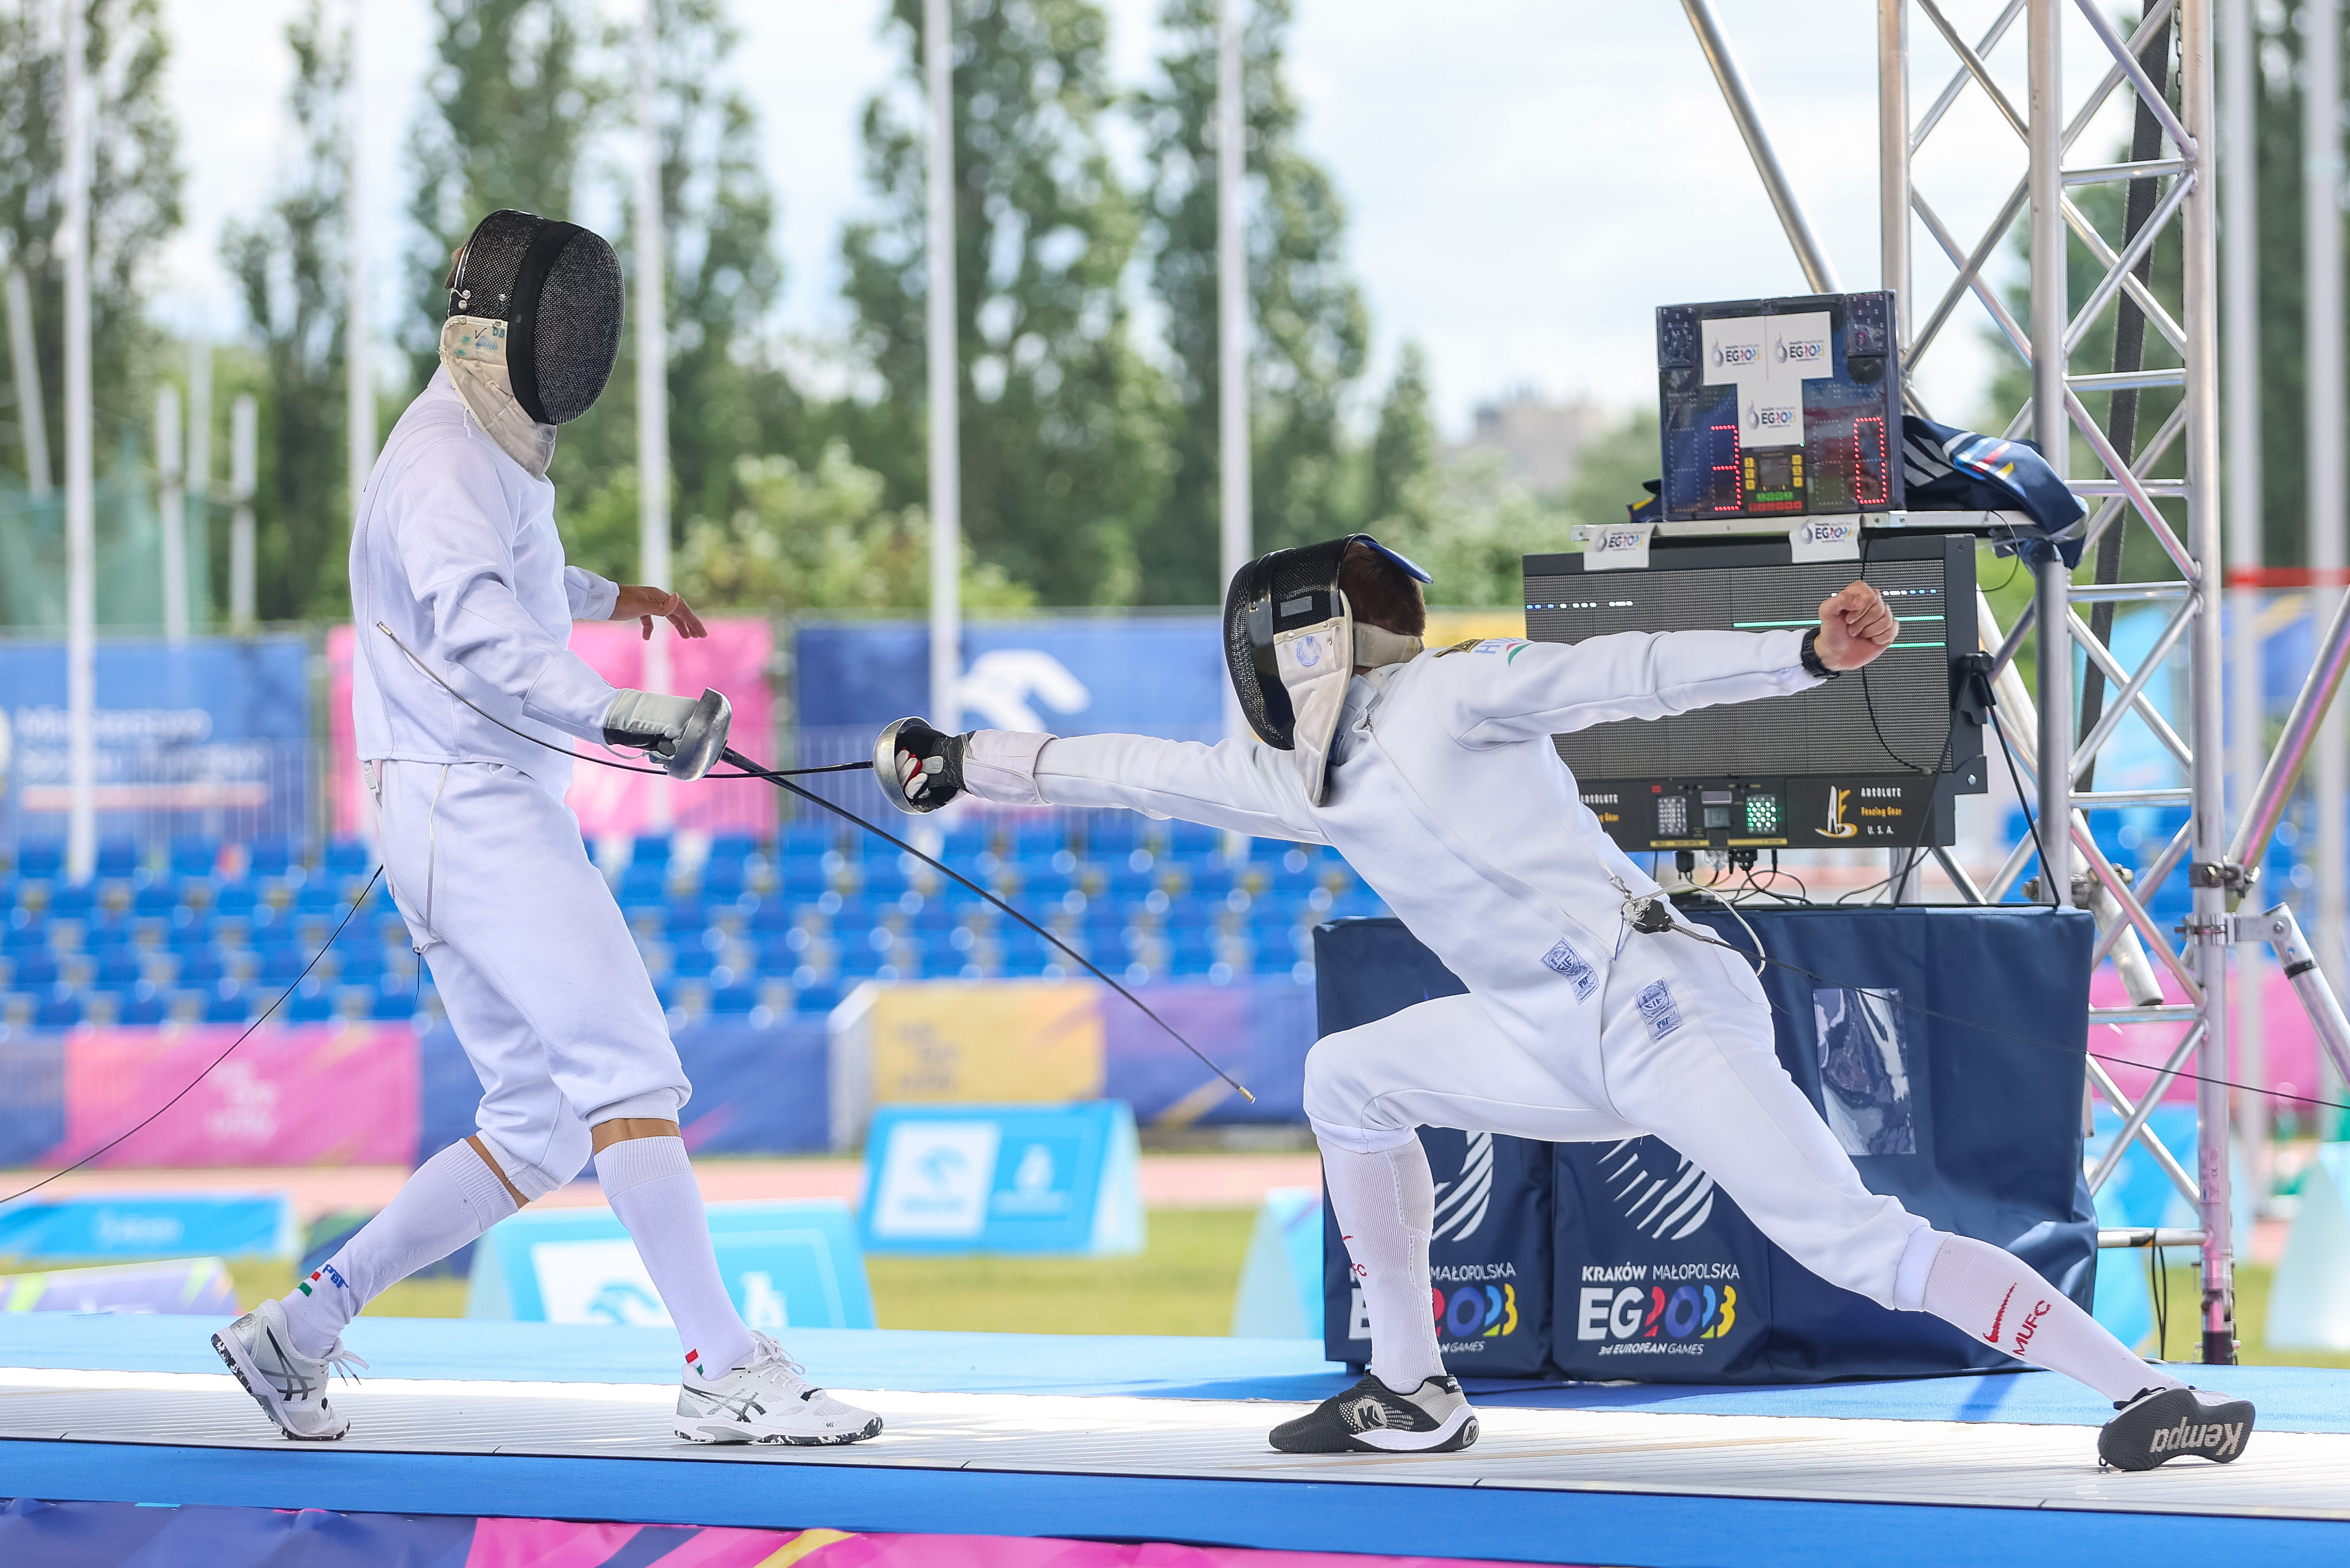 We know the first finalists in modern pentathlon